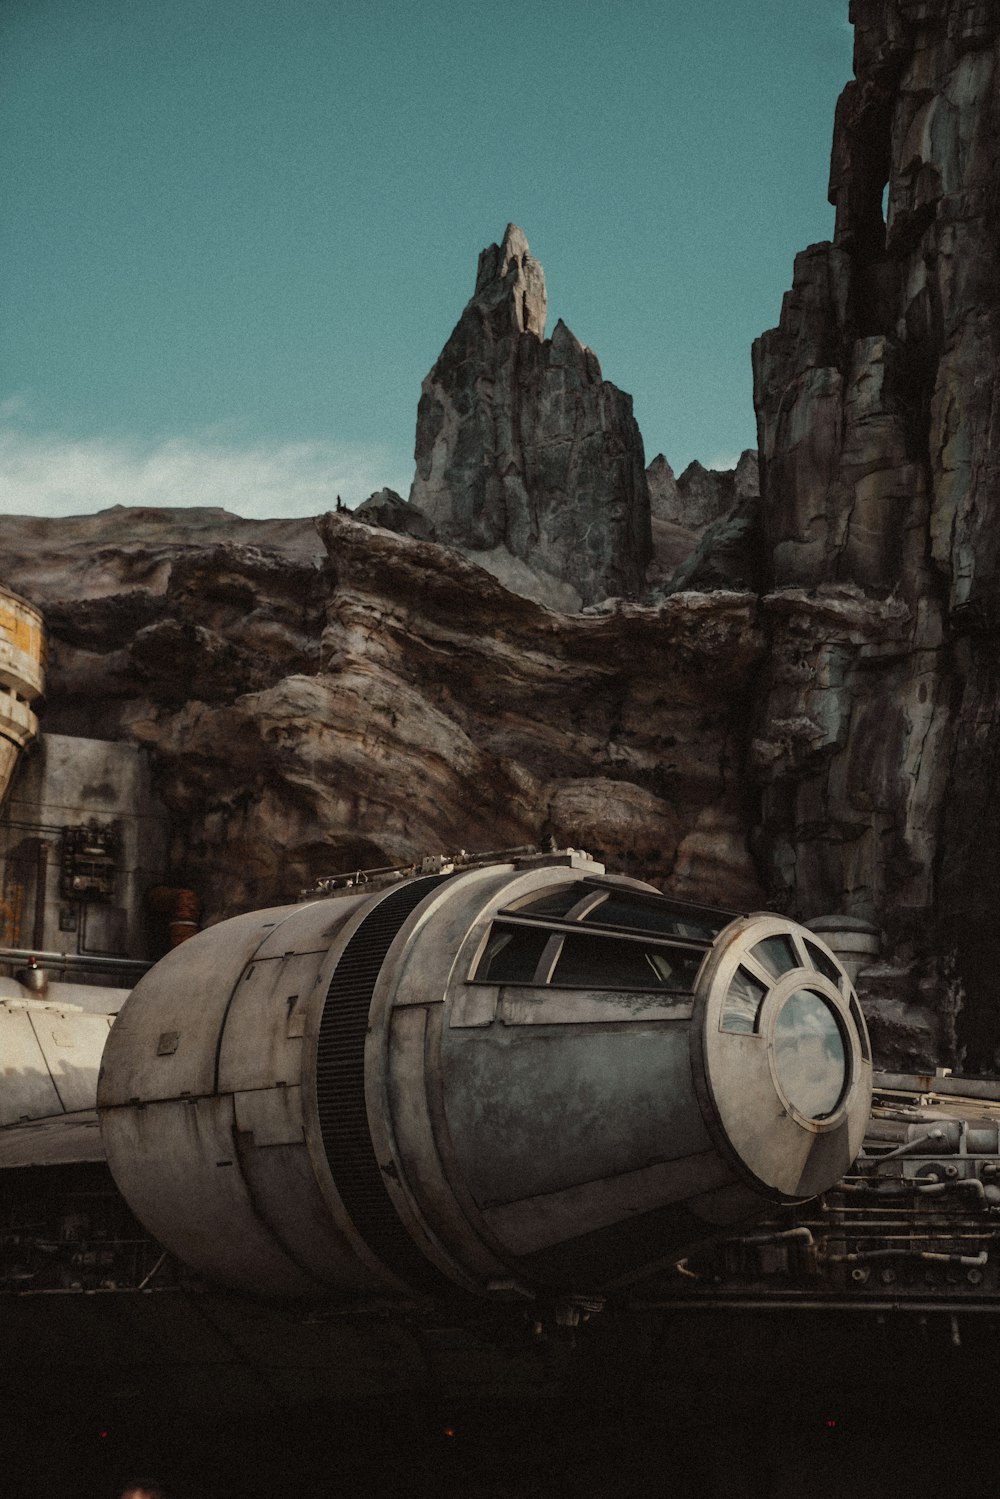 a star wars vehicle parked in front of a mountain